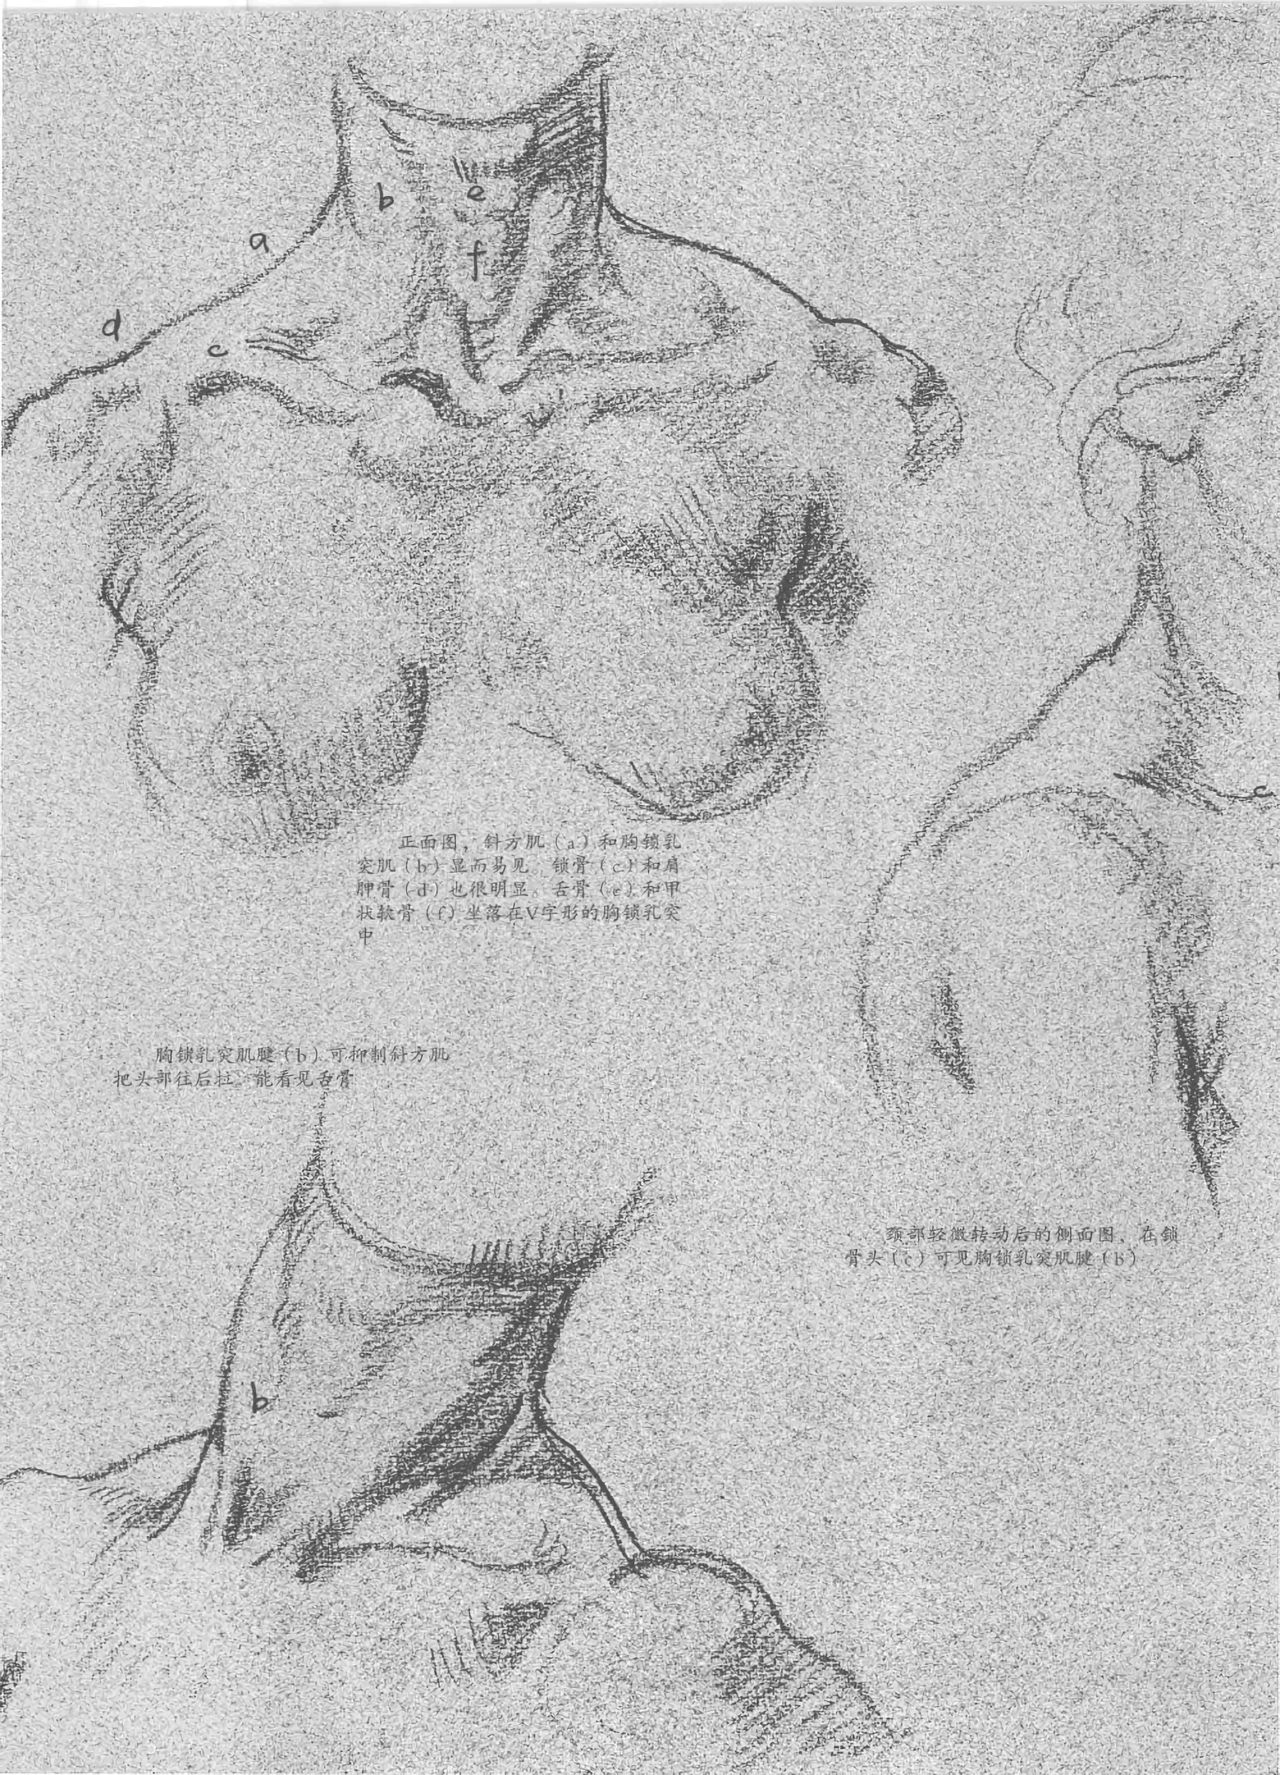 Anatomy-A Complete Guide for Artists - Joseph Sheppard [Chinese] 190